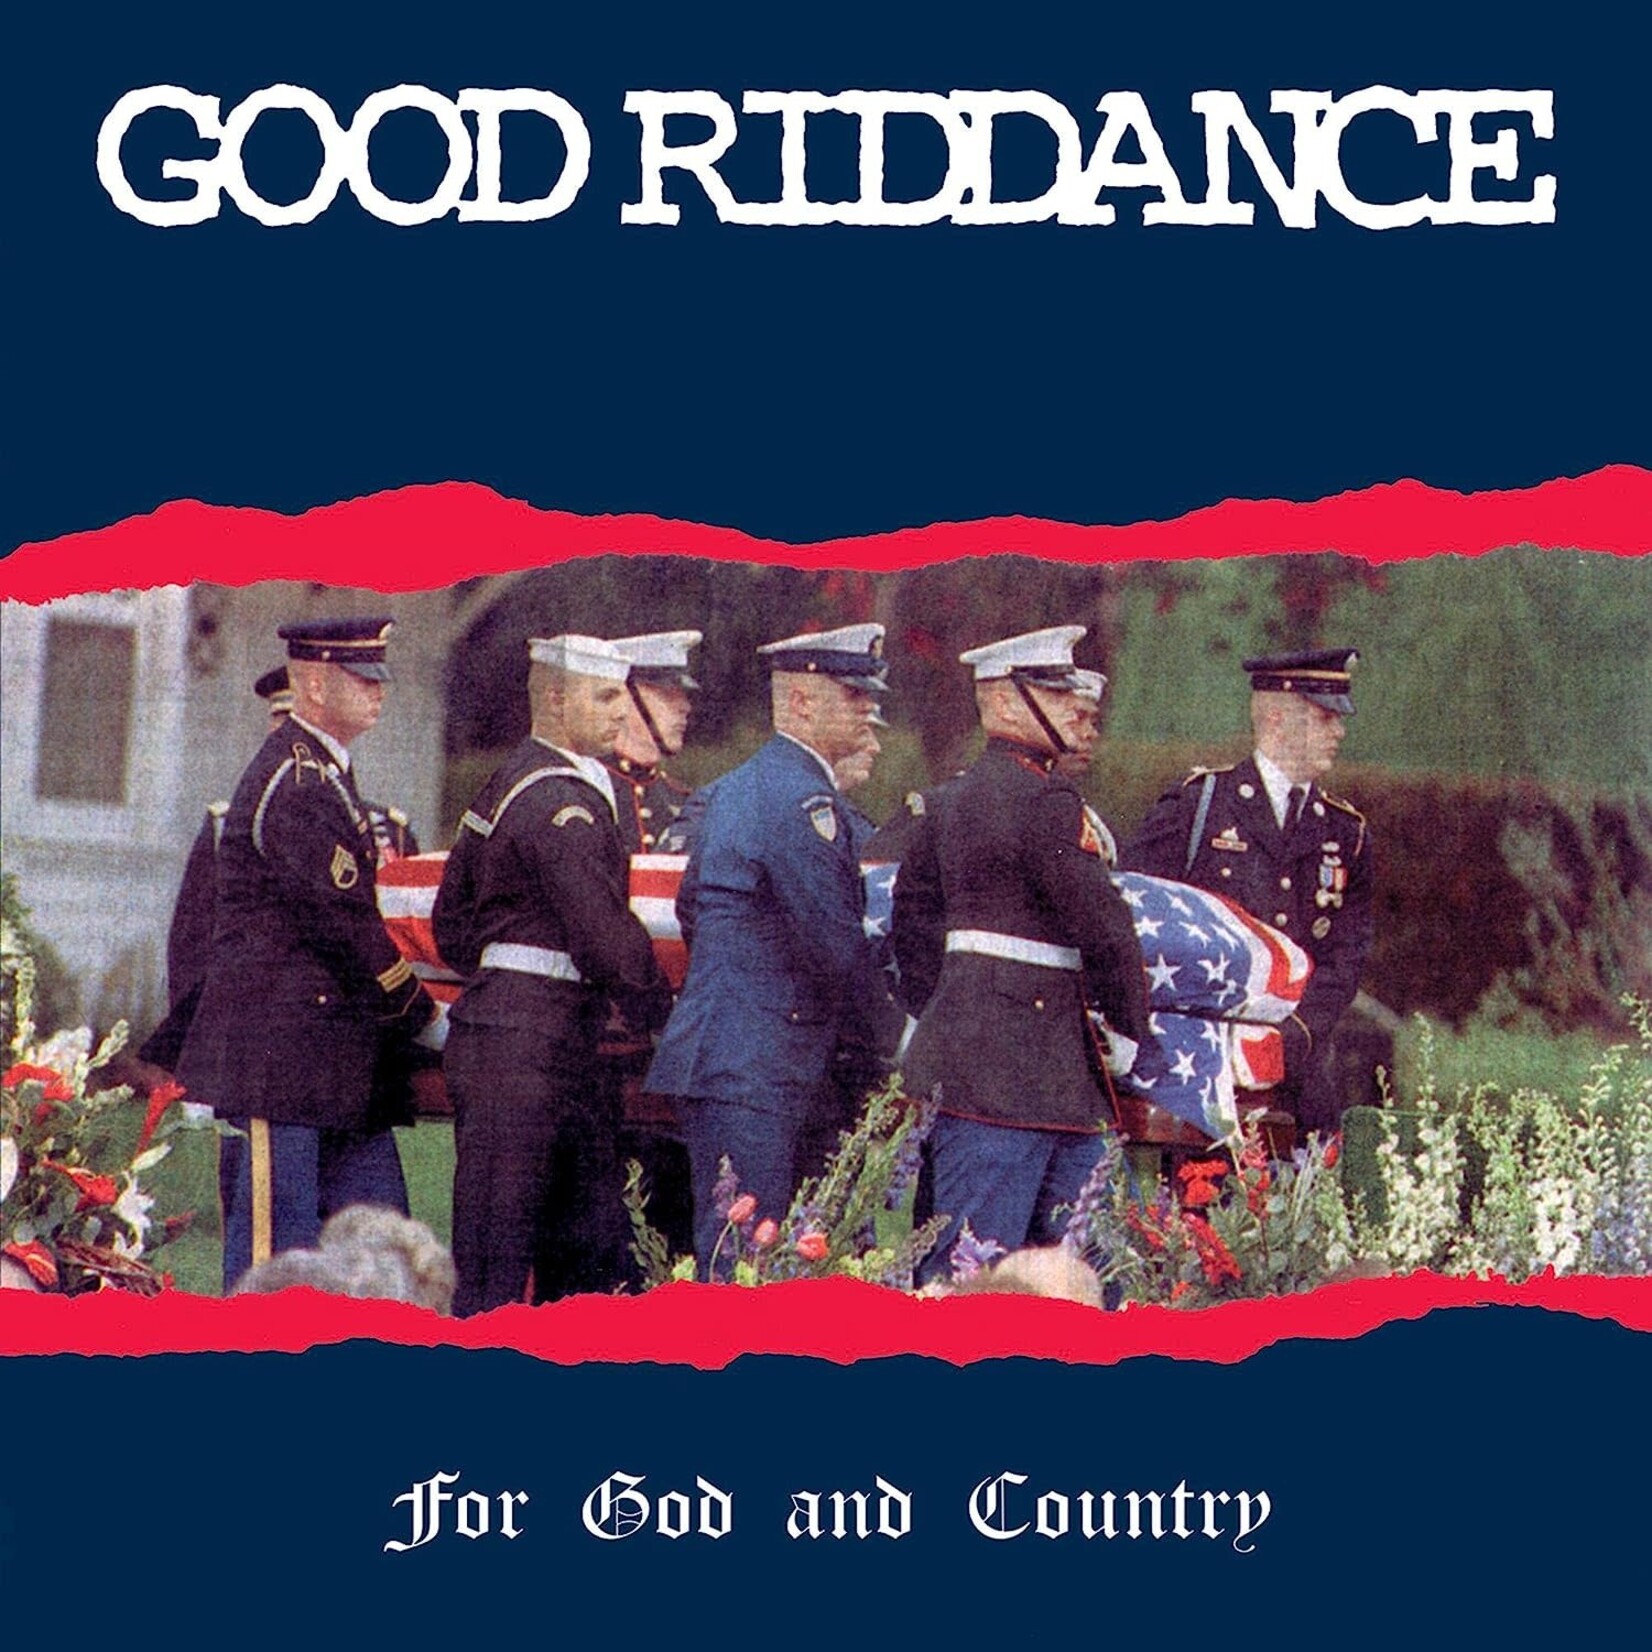 Vinyl Good Riddance - For God and Country